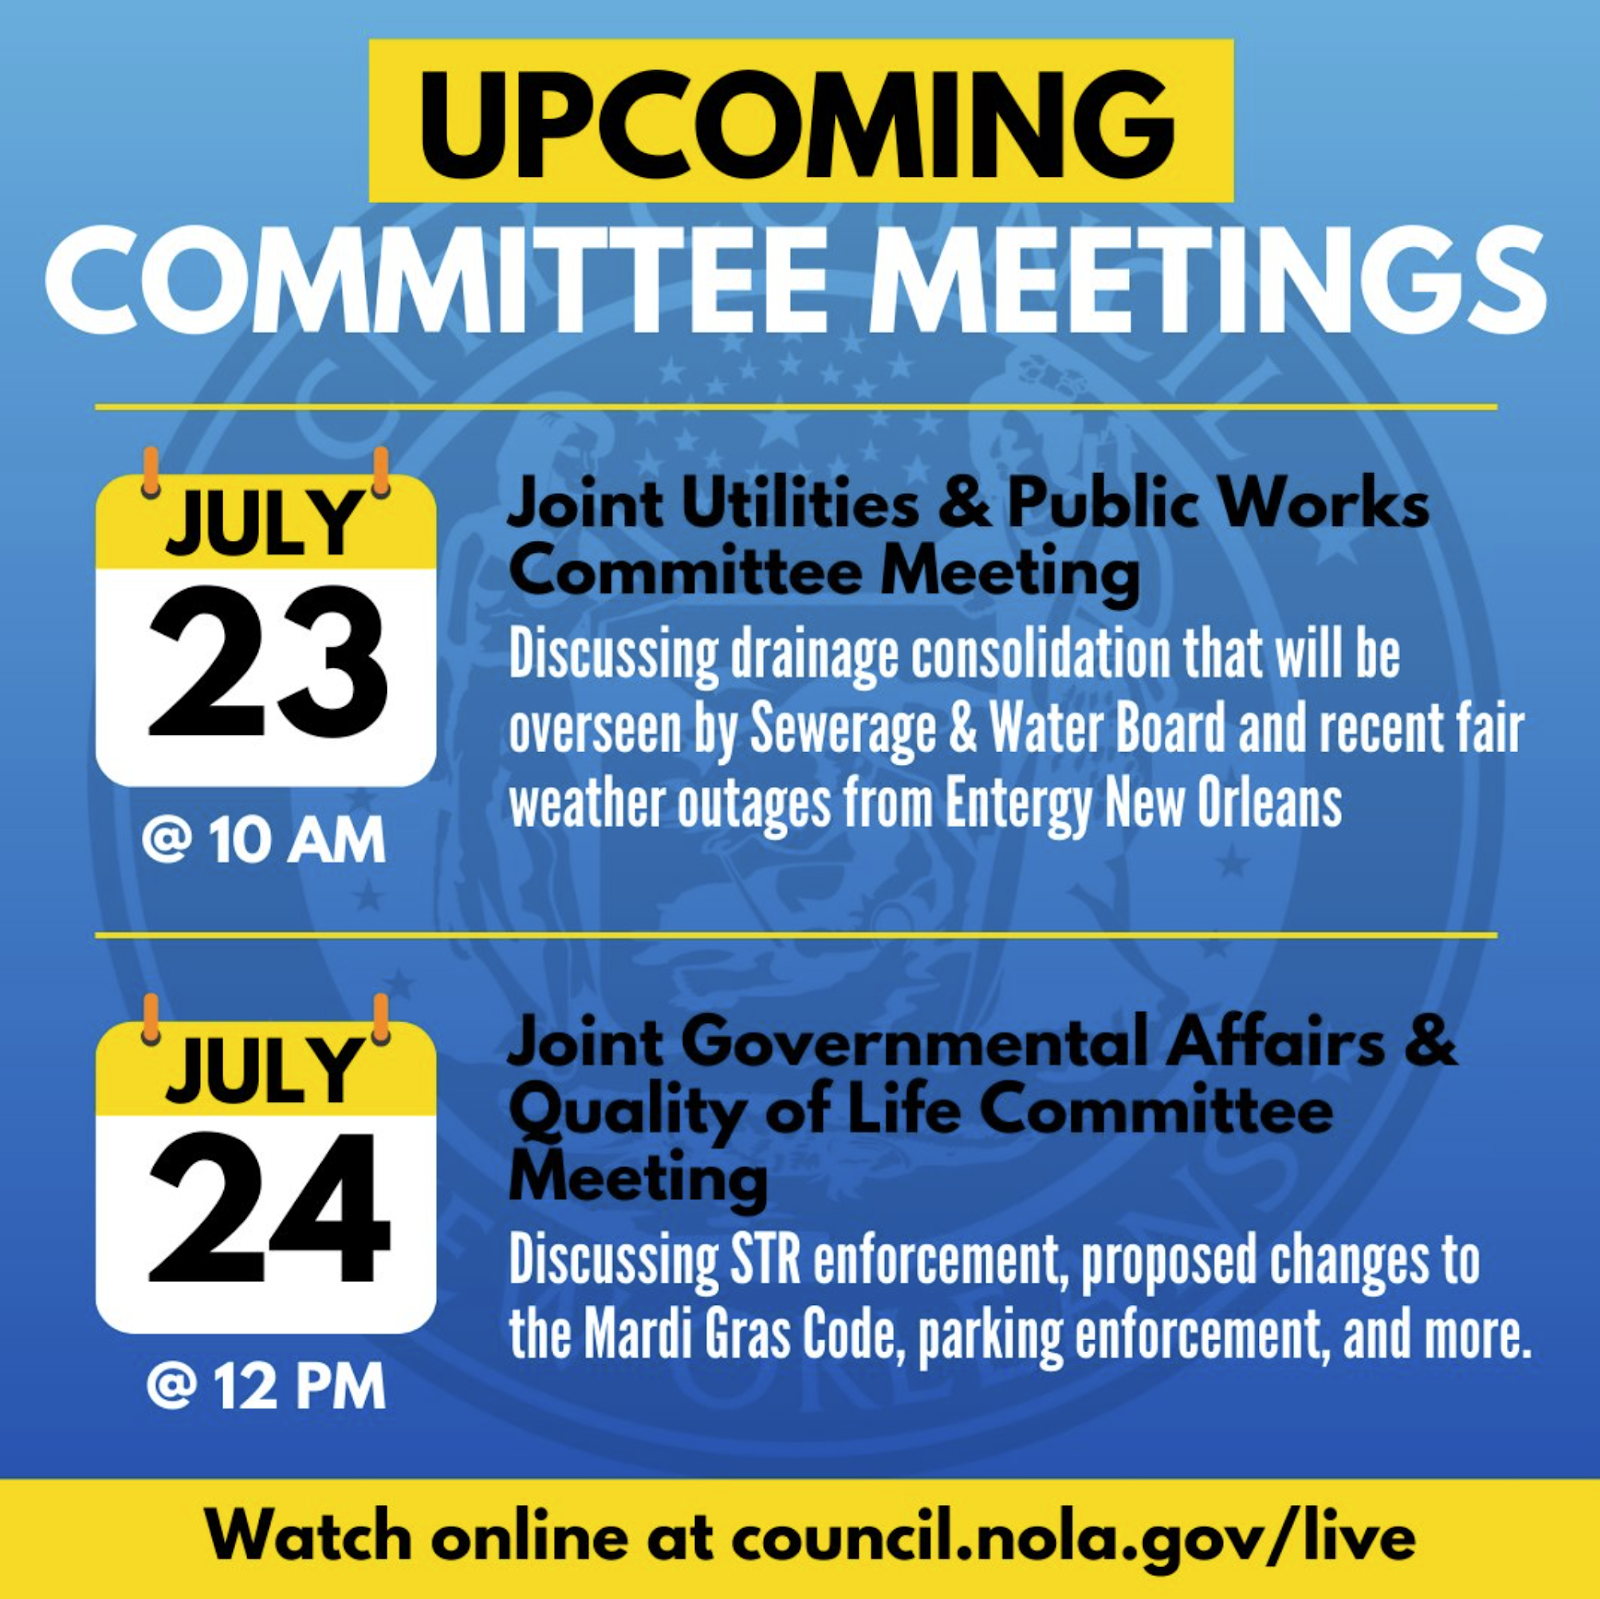 Reads as follows: Upcoming Committee Meetings. JULY 23RD @ 10AM: Joint Utilities & Public Works Committee Meeting. Discussing drainage consolidation that will be overseen by Sewerage & Water Board and recent fair weather outages from Entergy New Orleans. July 24th @ 12pm: Joint Governmental Affairs & Quality of Life Committee Meeting. Discussing STR enforcement, proposed changes to the Mardi Gras Code, parking enforcement, and more. Watch online at council.nola.gov/live.